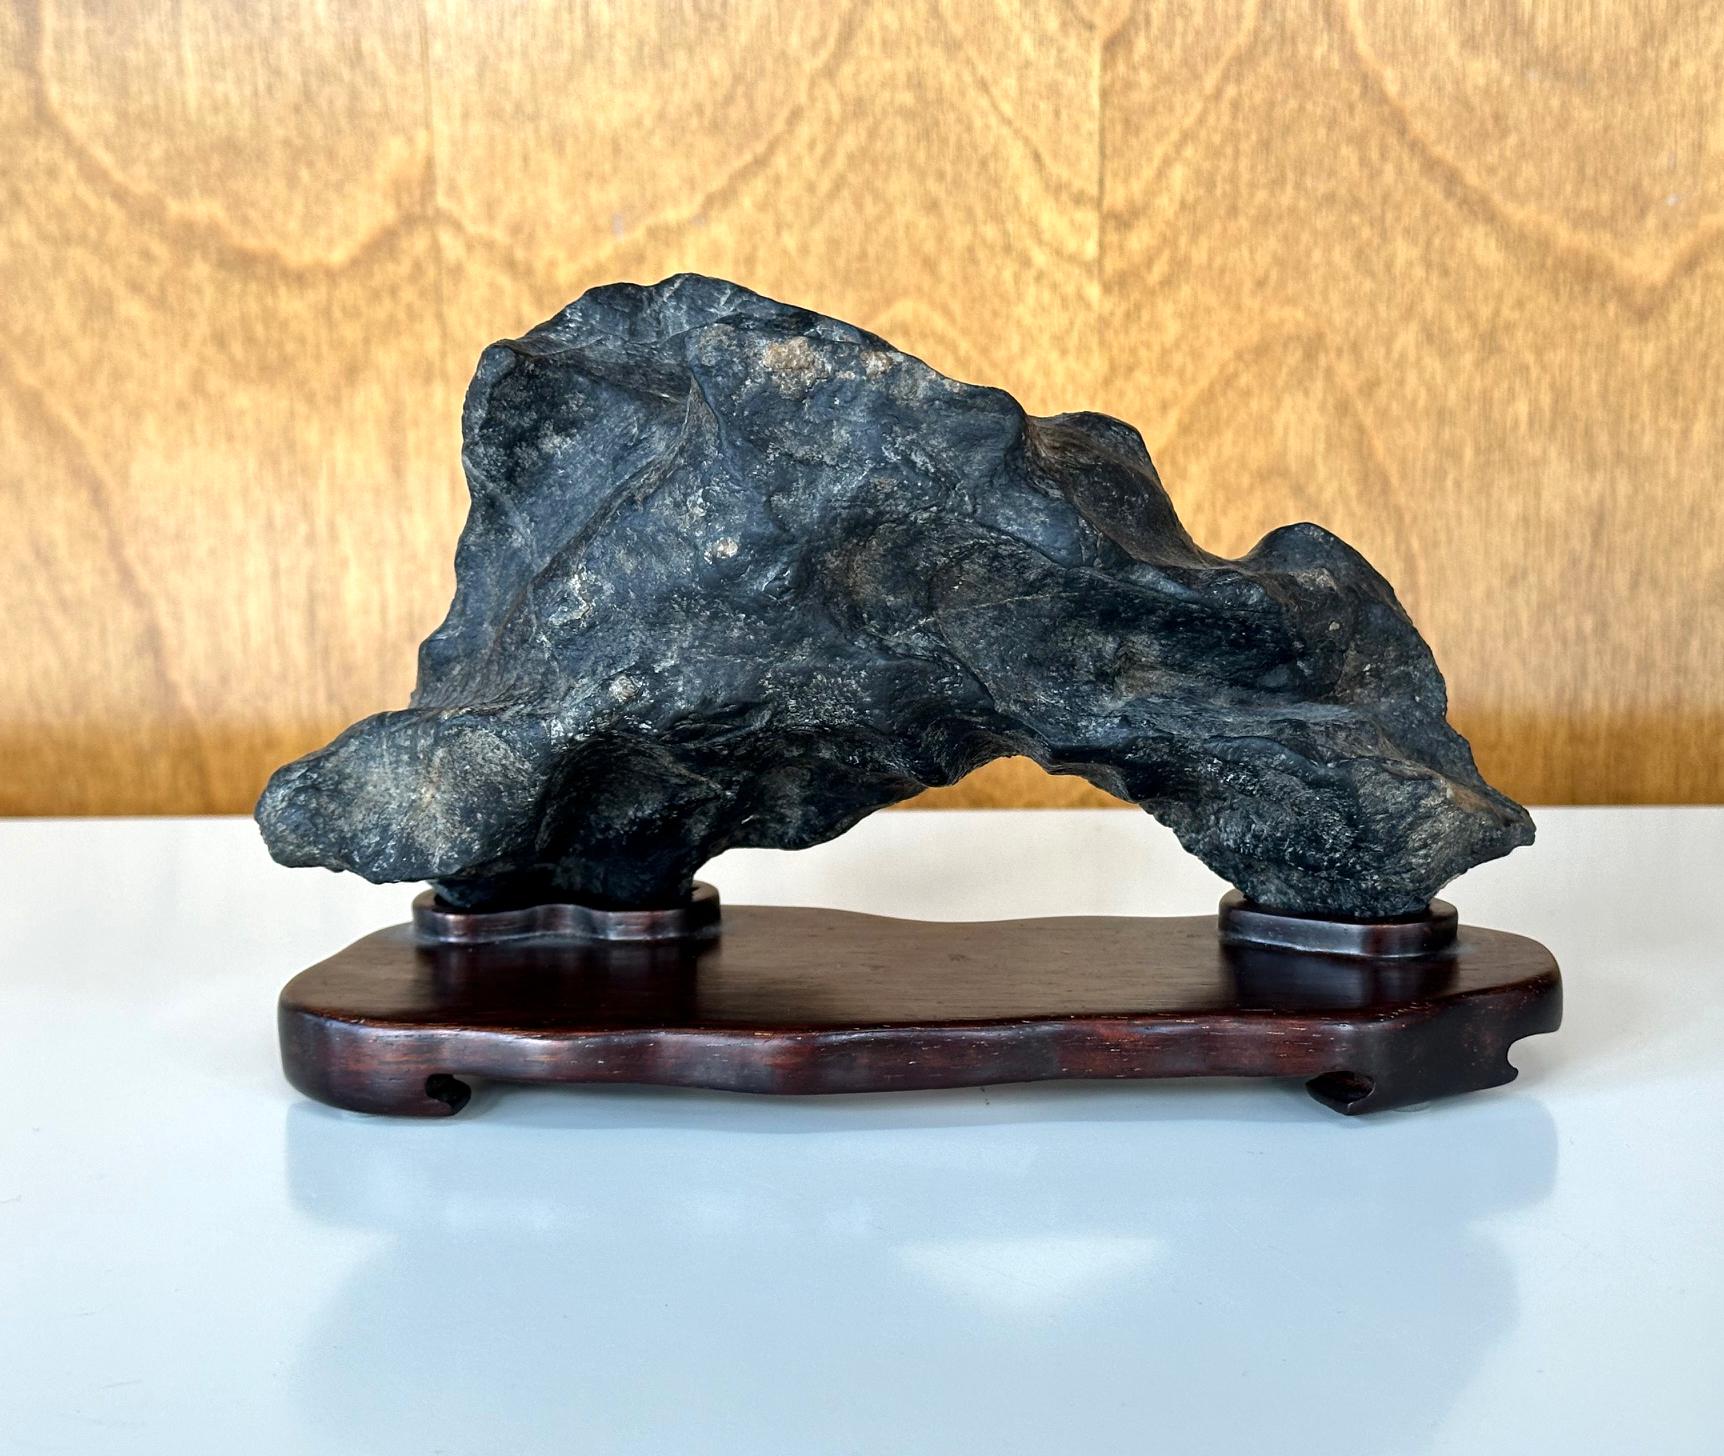 A small desk top Chinese scholar stones (also known as Gong Shi, meditation stone and spirit rock) fitted on a hand-carved wood stand circa late 19th century. The specimen is of a black Lingbi type stone in an arch form mimicking a horizontal